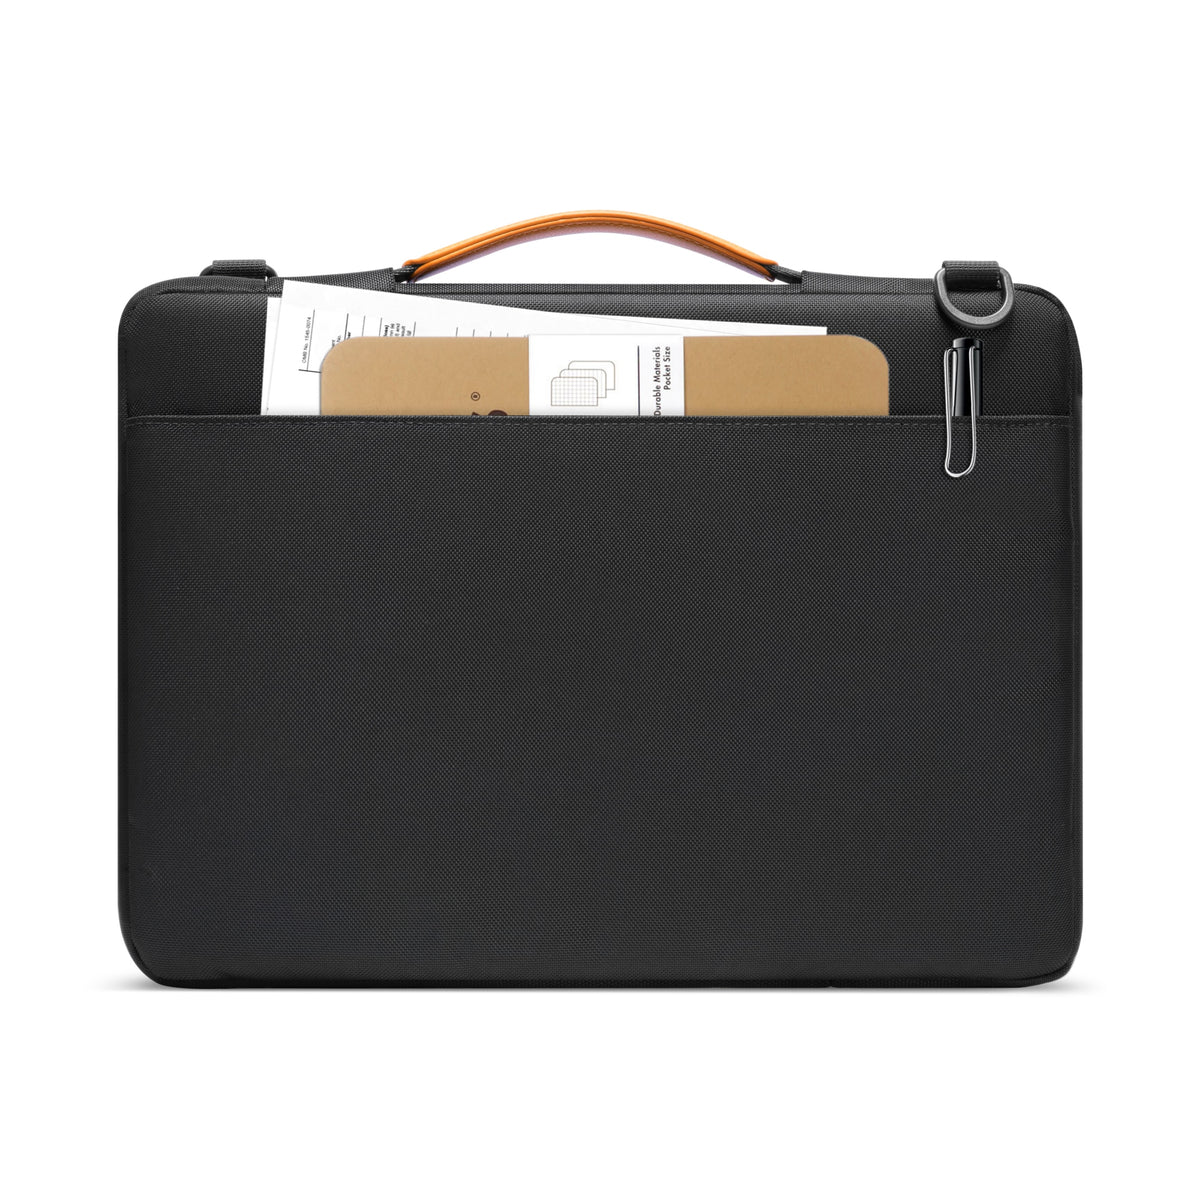 secondary_Defender-A42 Laptop Briefcase For 15-inch MacBook Air